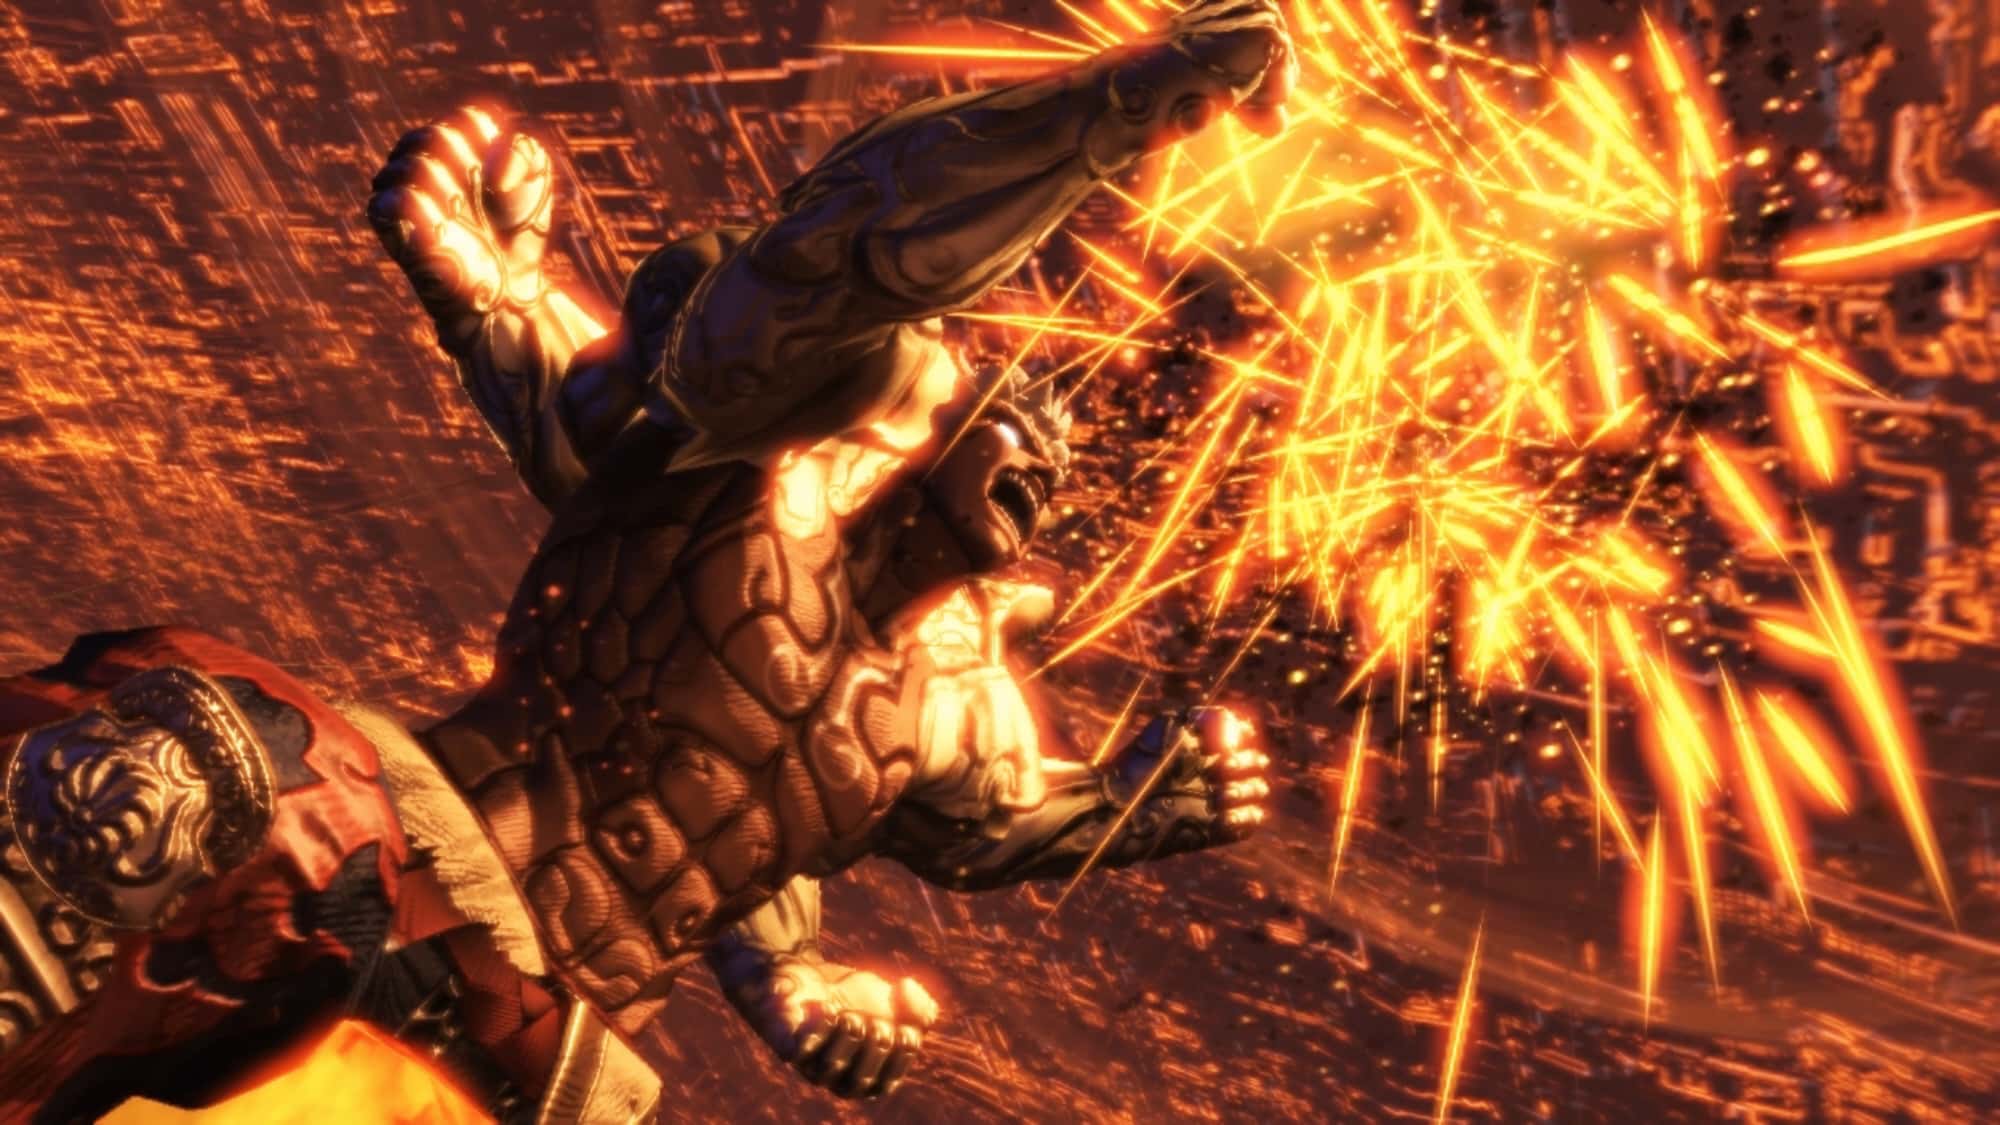 New Asura’s Wrath trailer from Captivate 2011 - 2000 x 1125 jpeg 1352kB